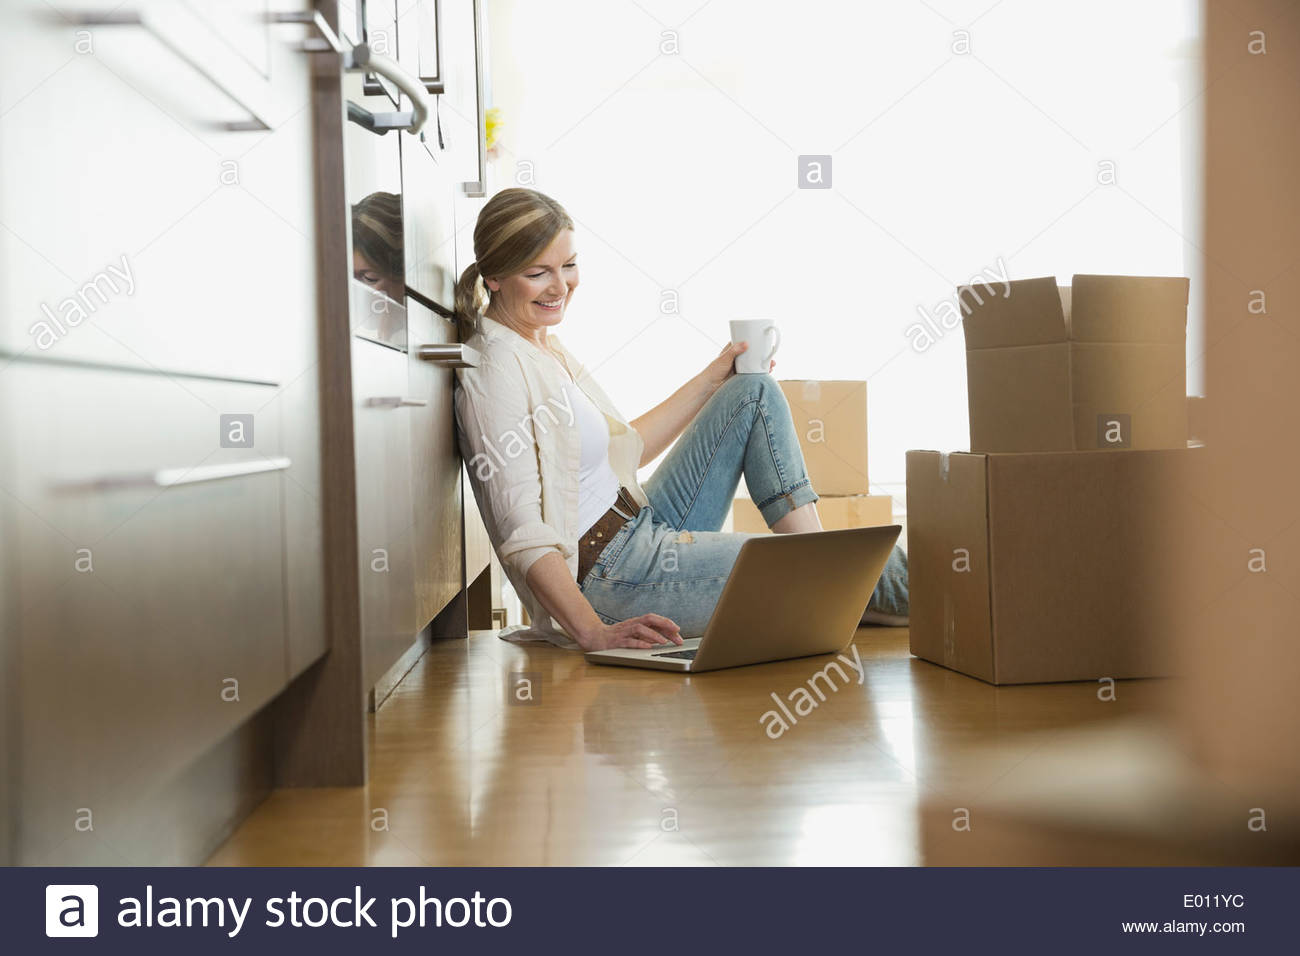 Woman using laptop on floor near moving boxes Stock Photo